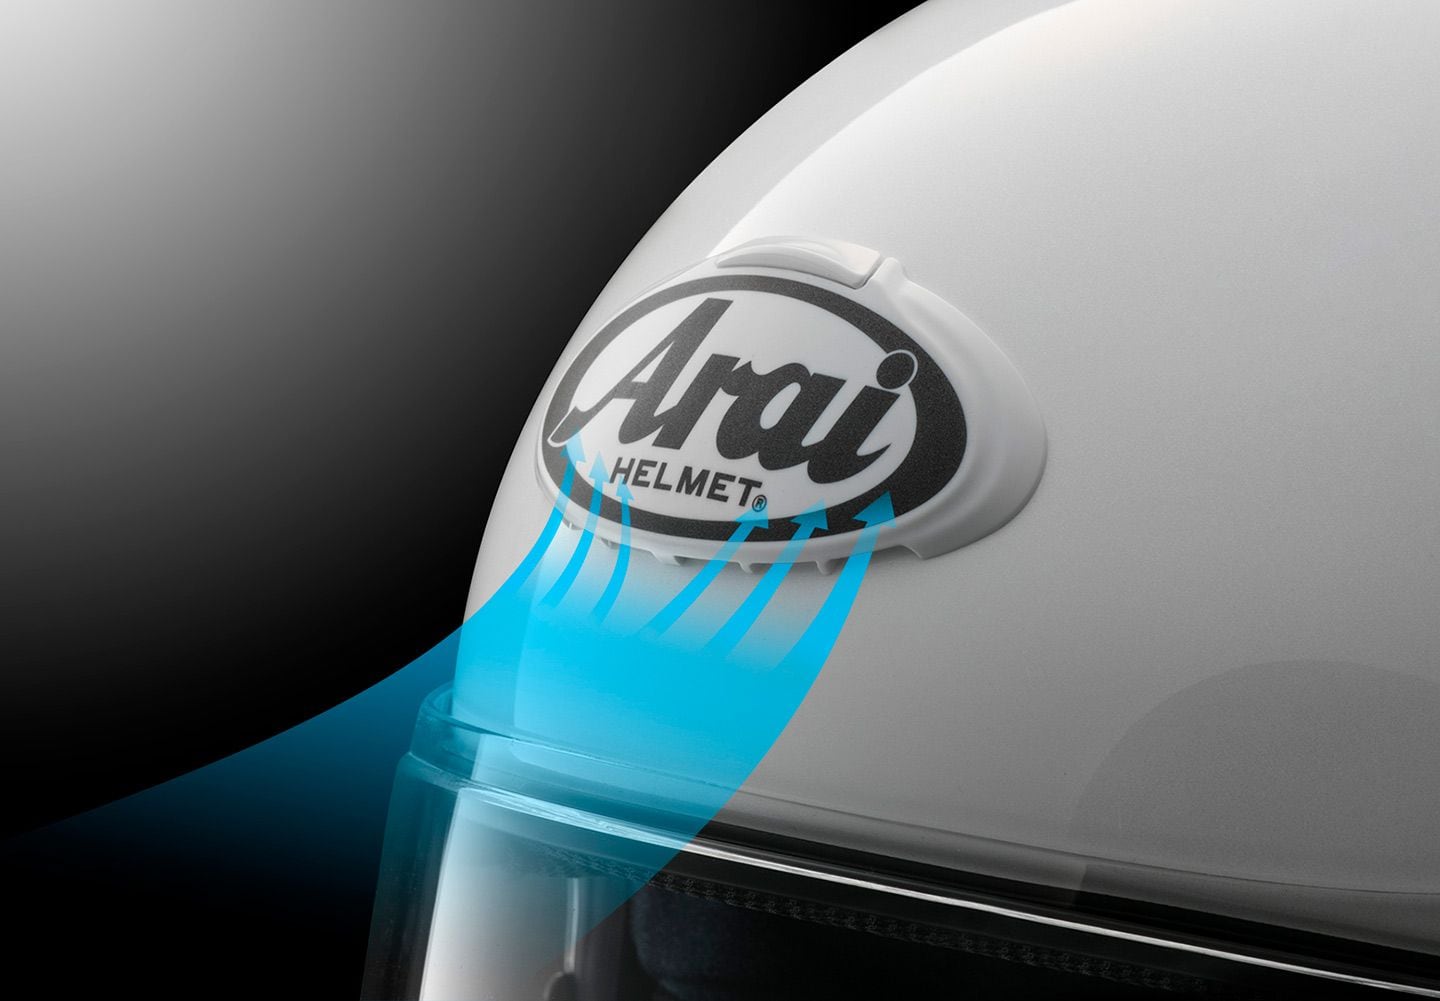 Arai utilizes its 3D duct intake vent and a revised chin intake to increase airflow volume up to 200 percent.